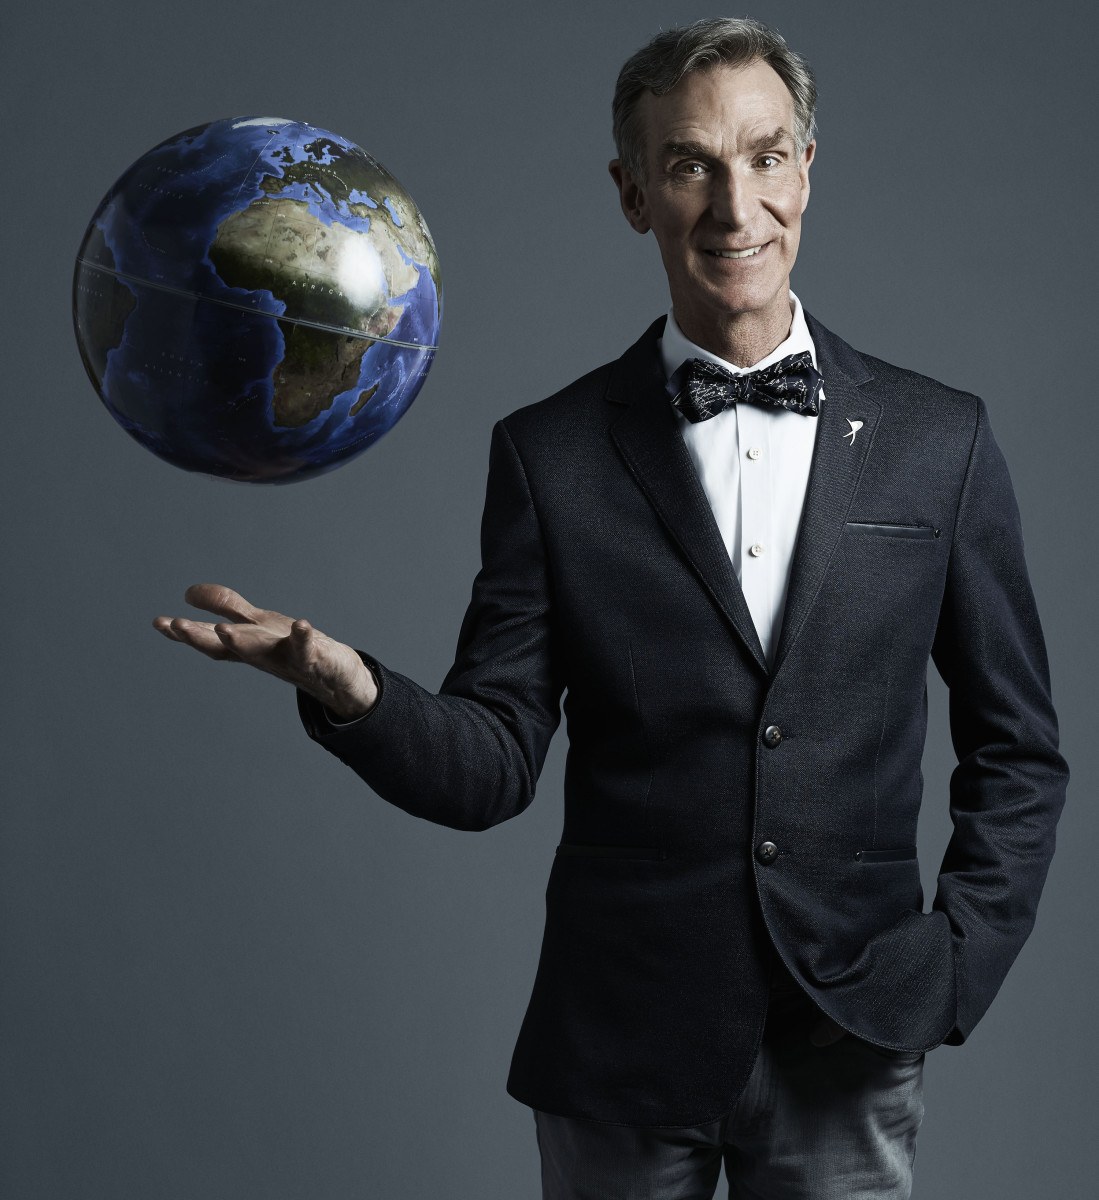 10 Things You Probably Didn’t Know About Bill Nye The Science Guy.